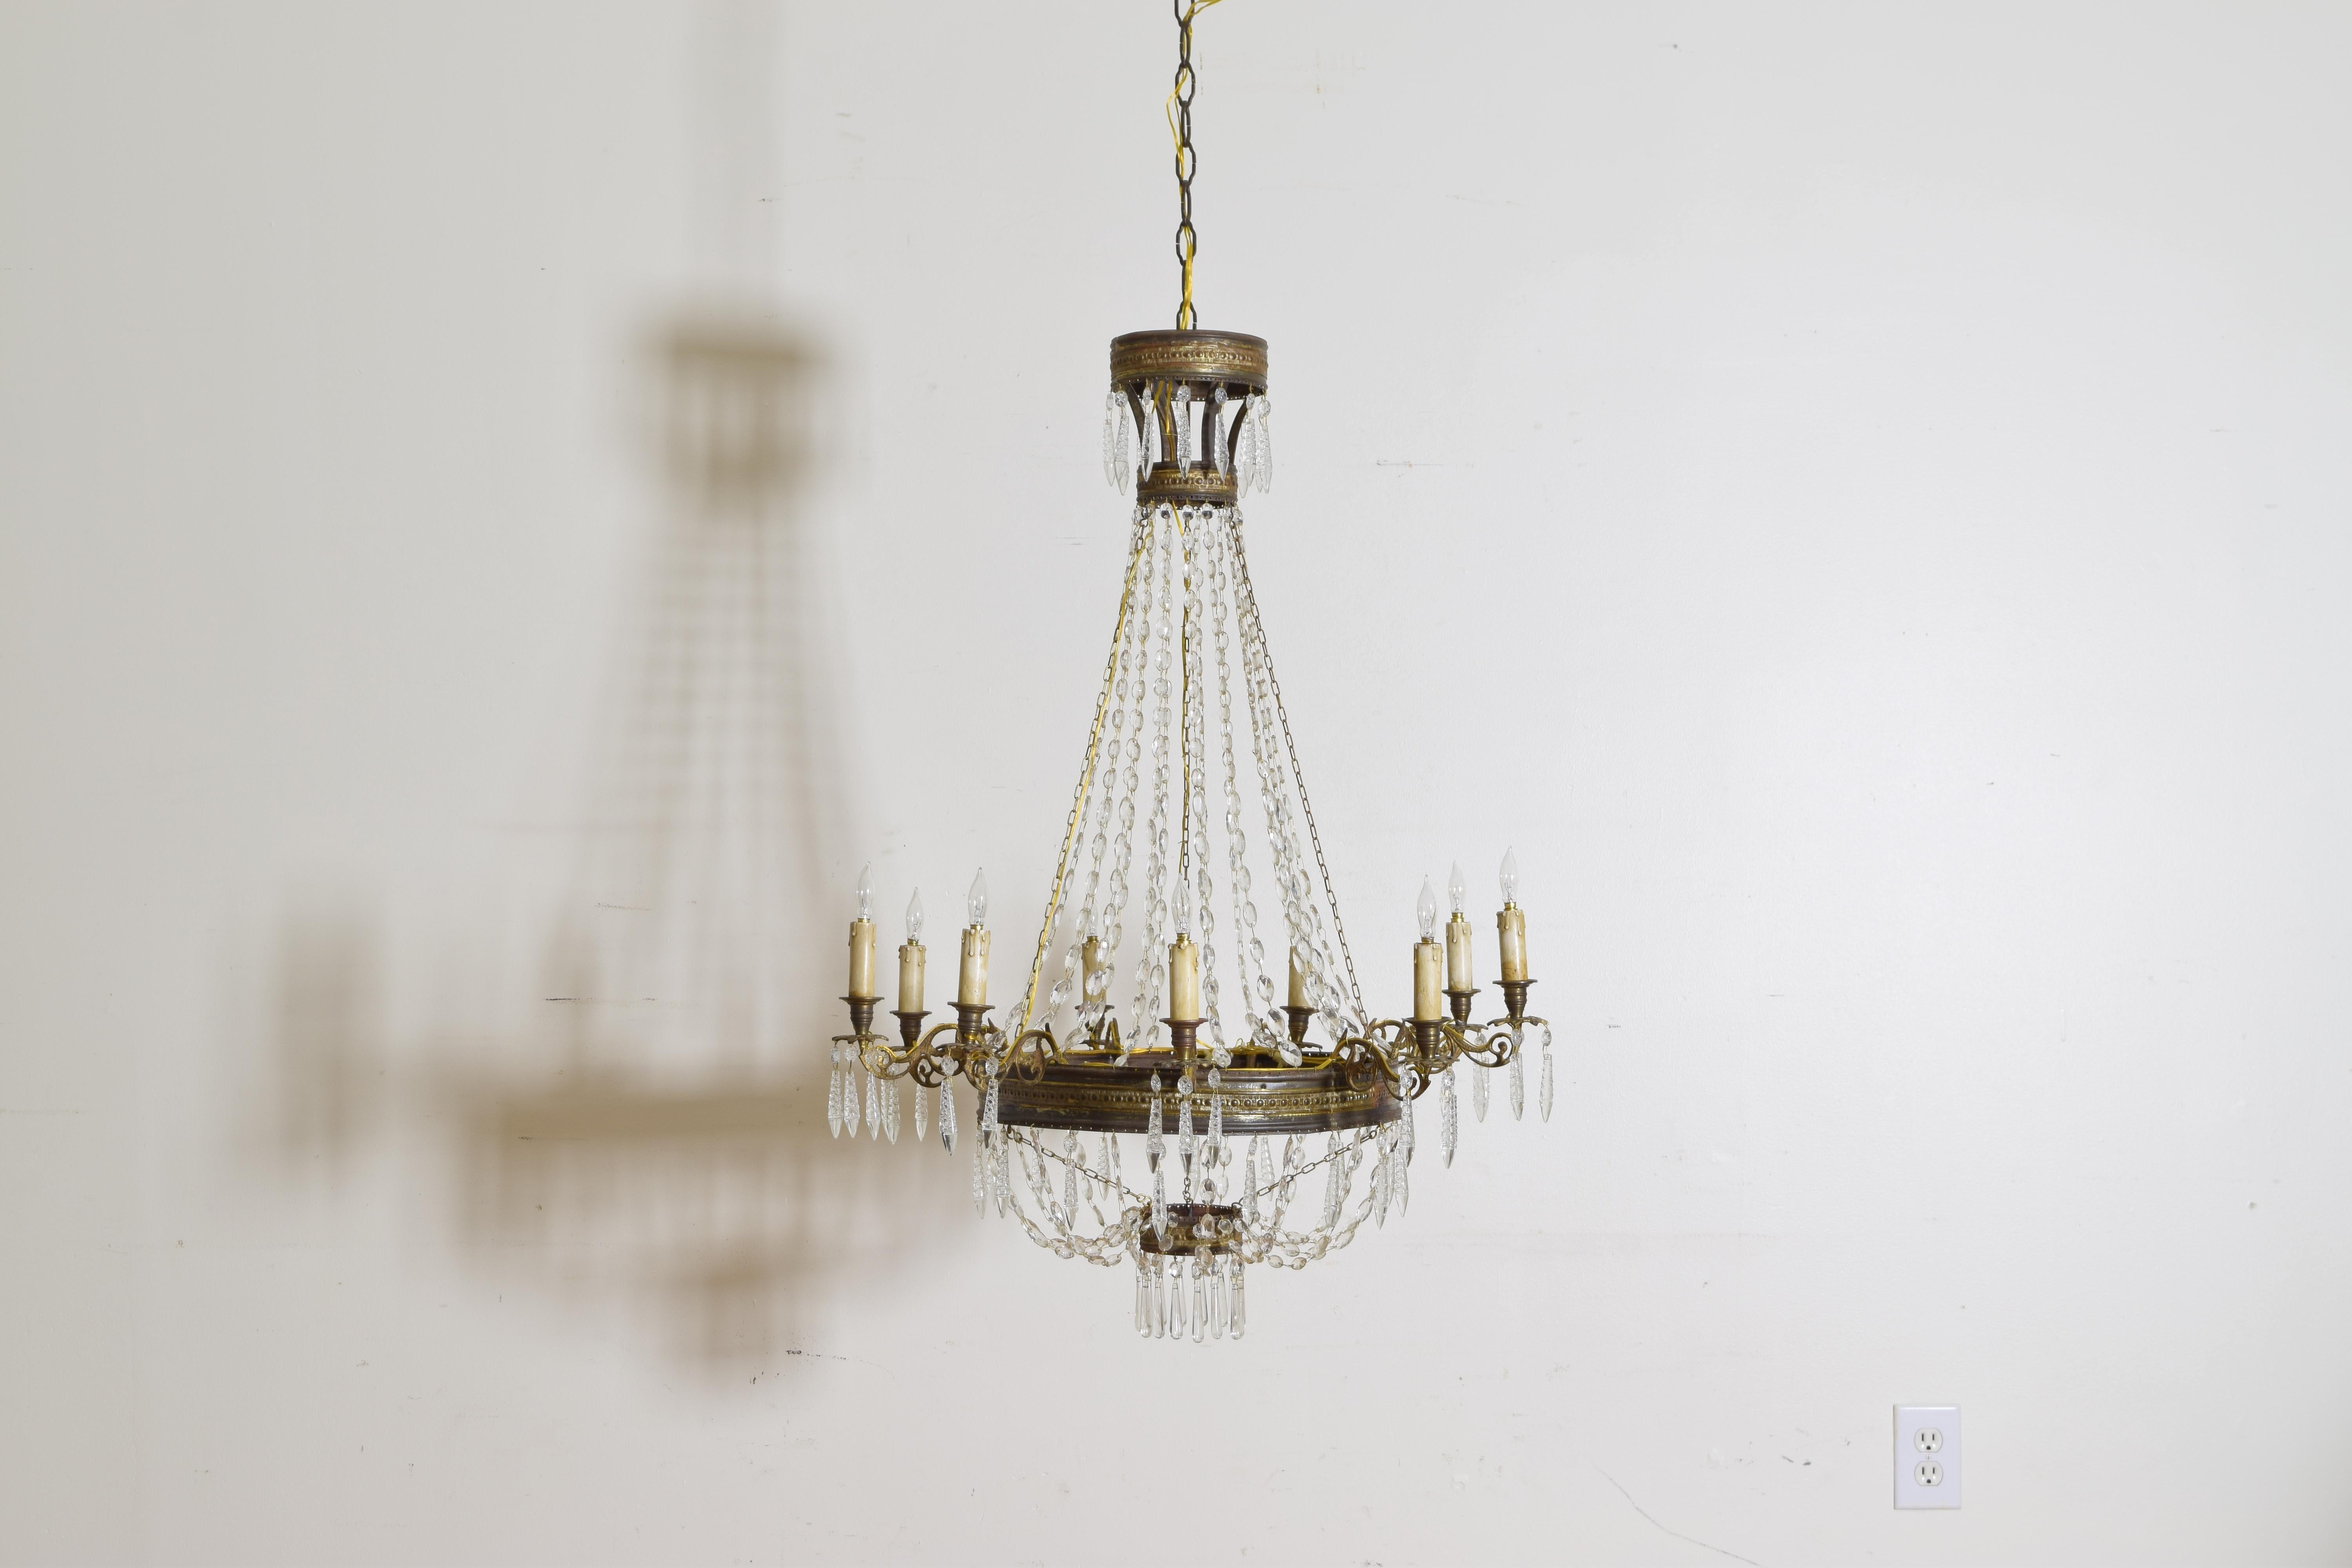 The chandelier of typical basket form with four round sections connected by graduated bead chains, the largest and central ring issuing 9 cast brass arms with bobeches and hanging prisms, the upper and lower rings also with hanging prisms, 19th